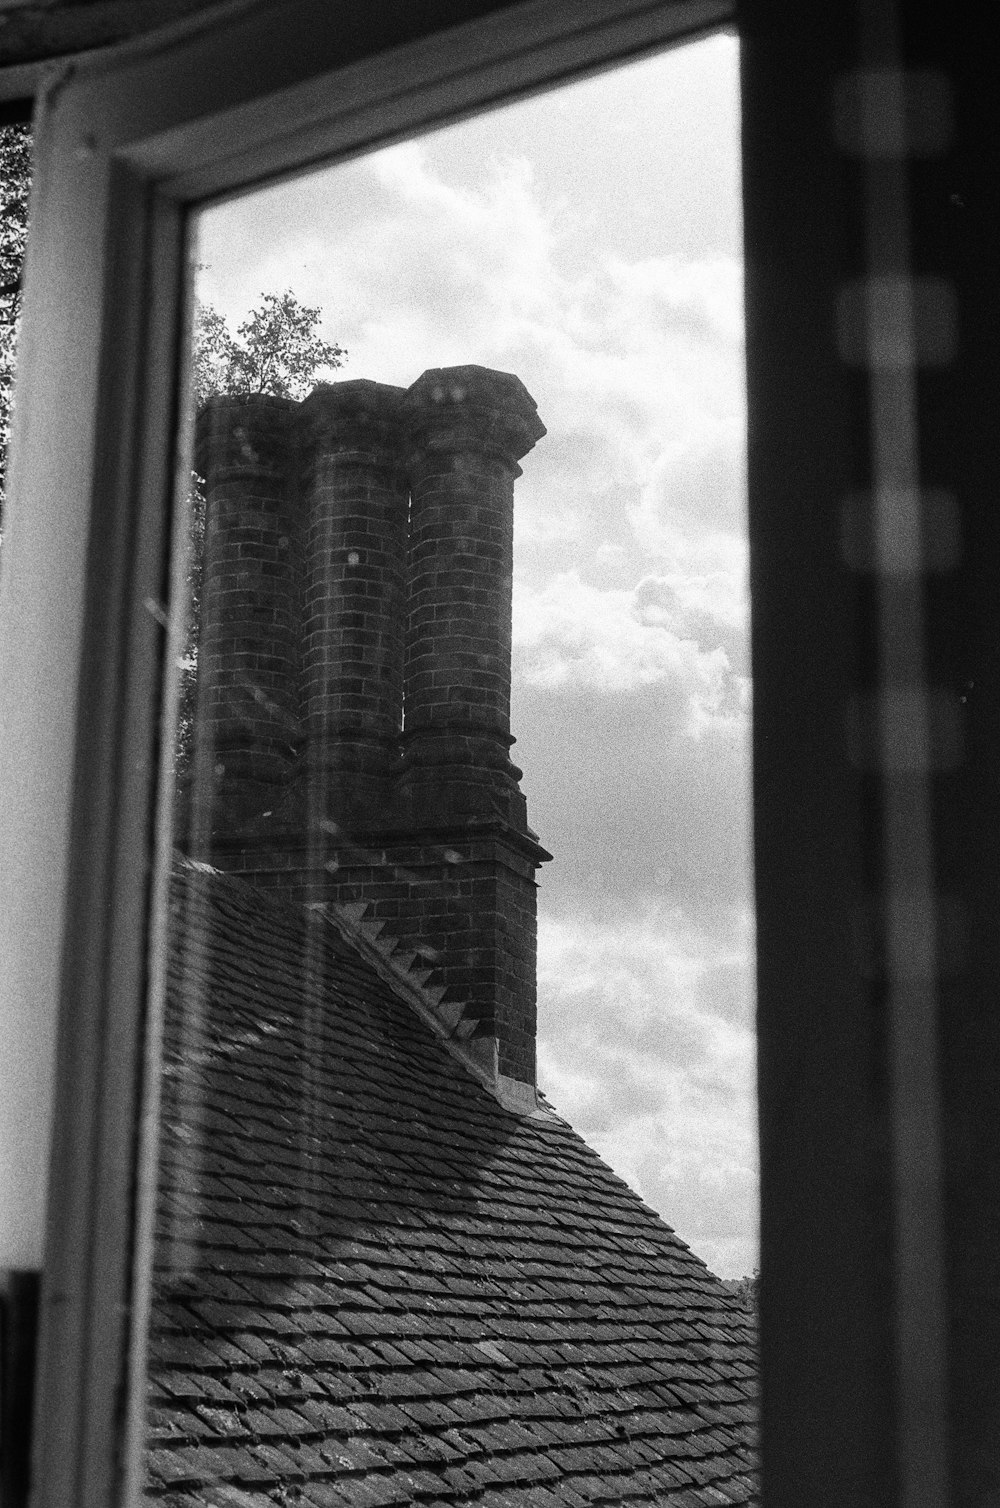 a black and white photo of a roof and a window